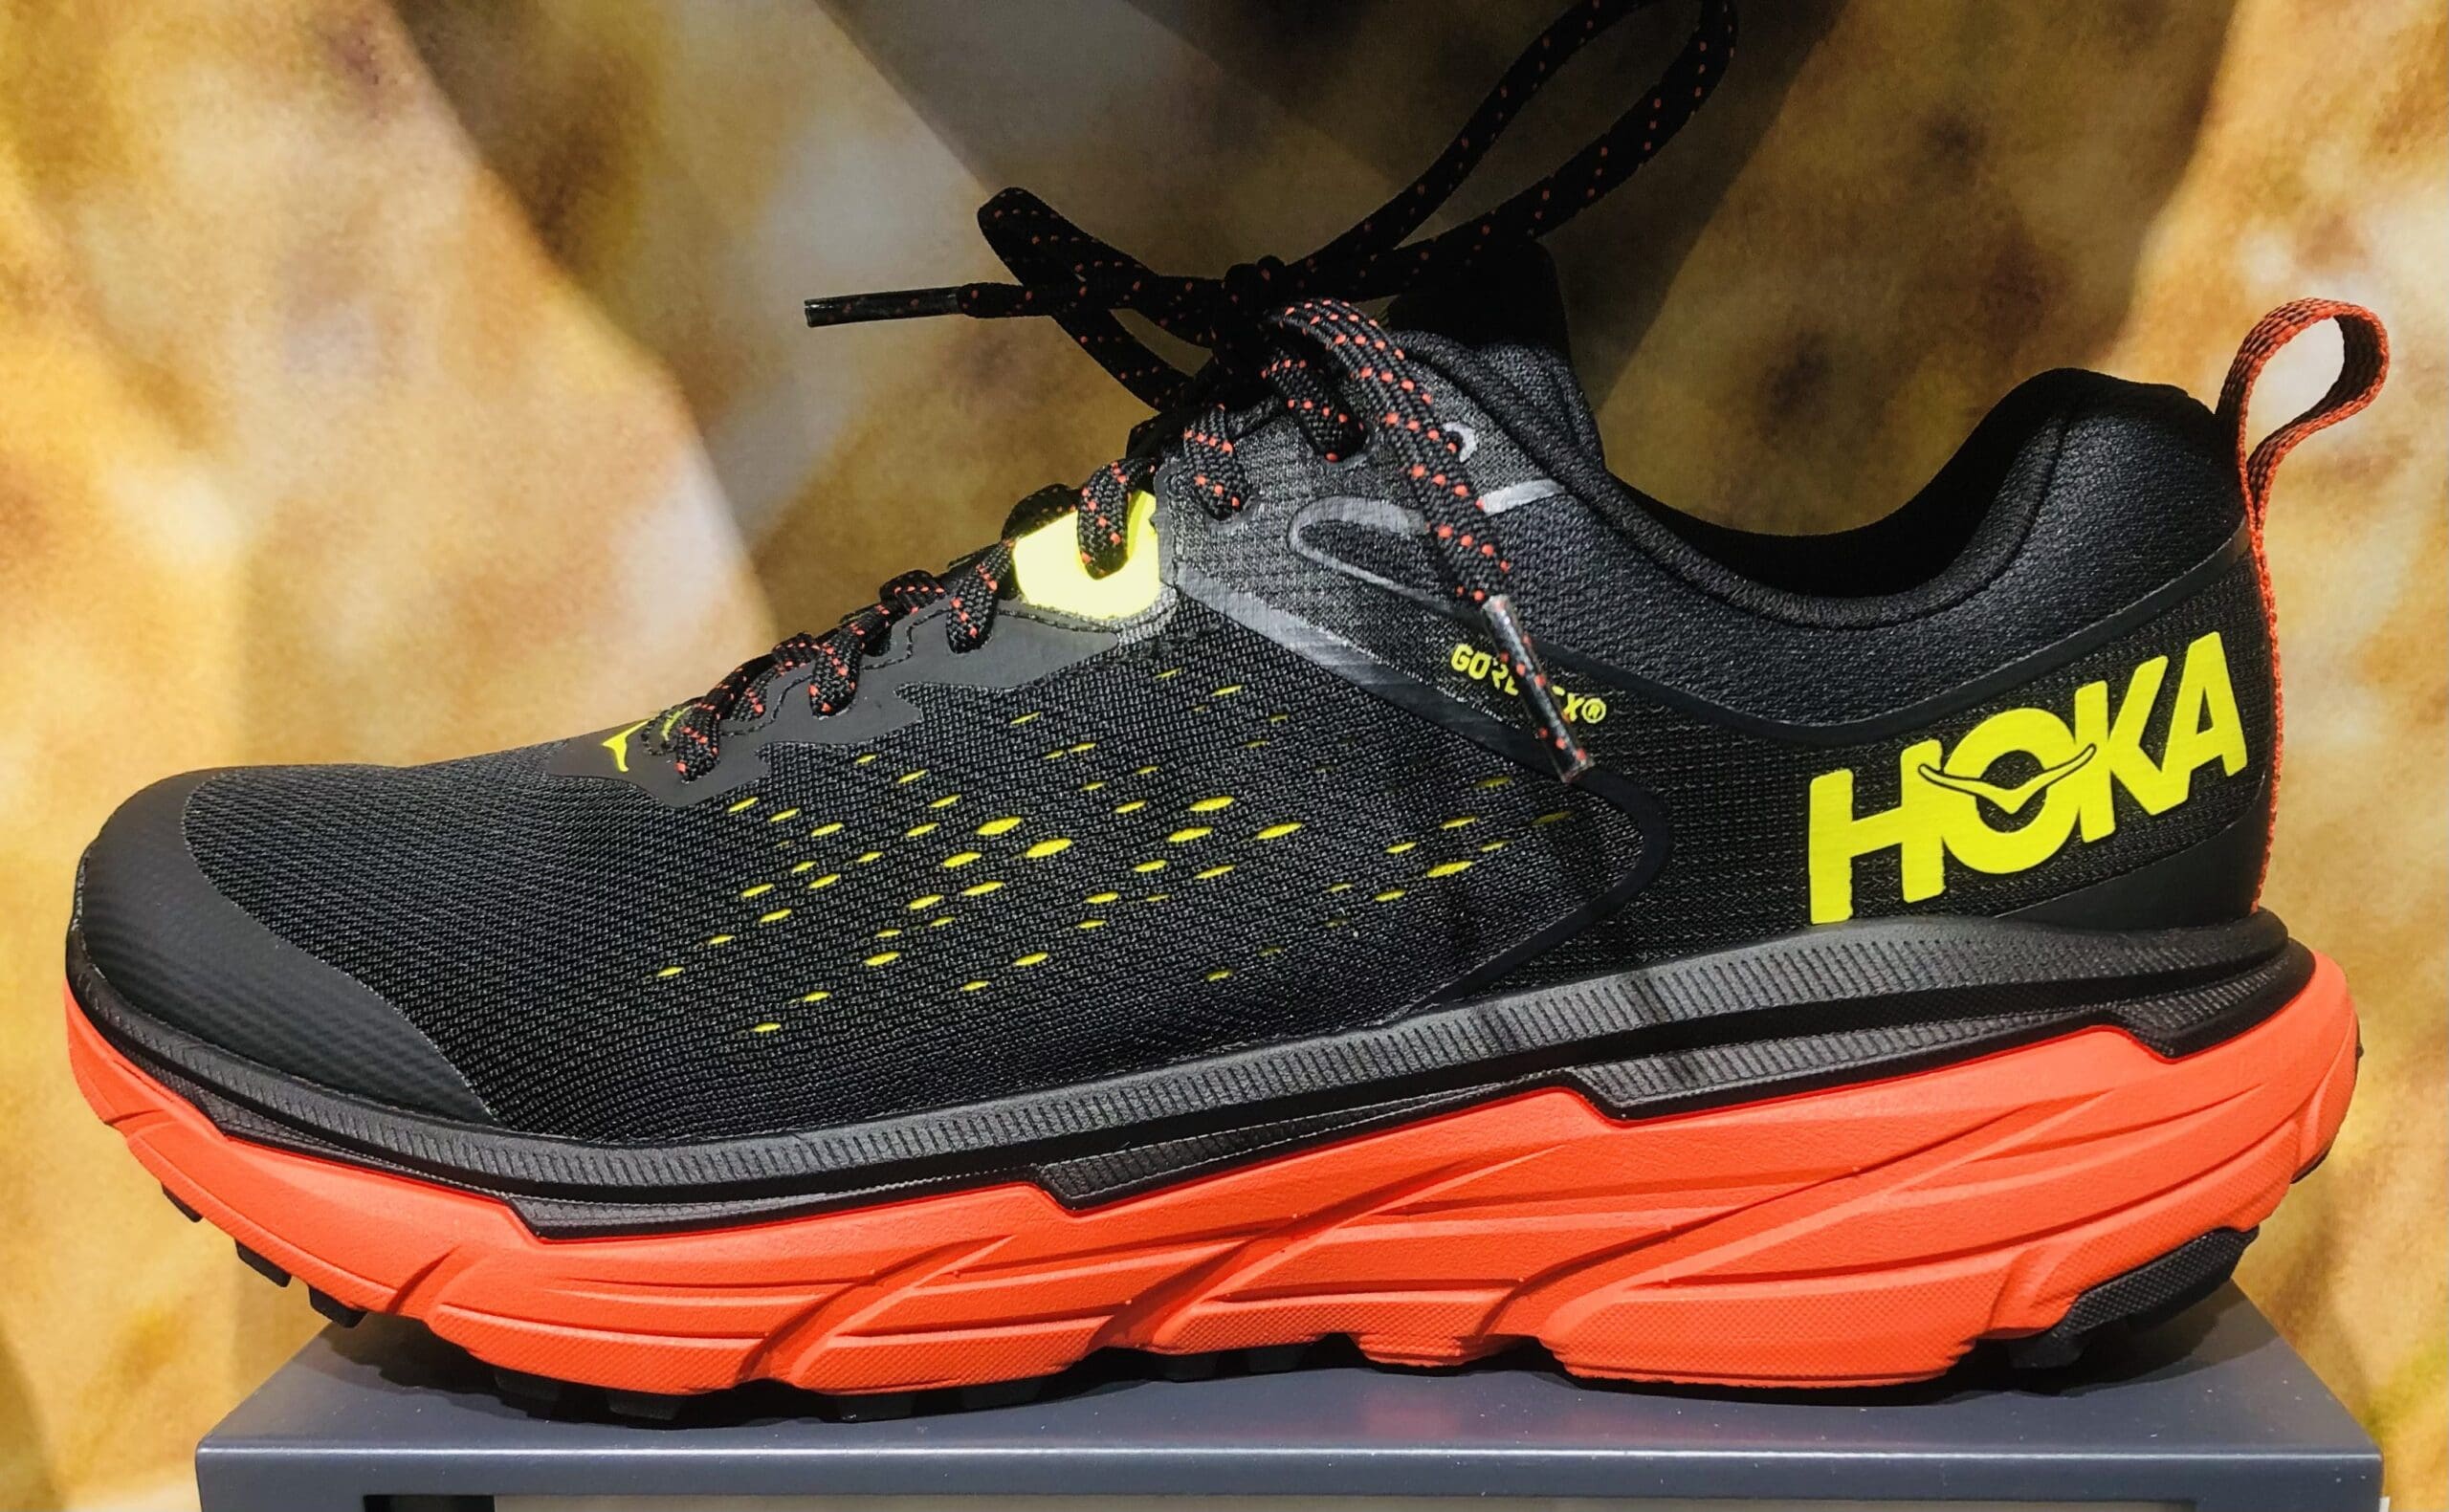 How To Get The Hoka Shoes First Responder Discount